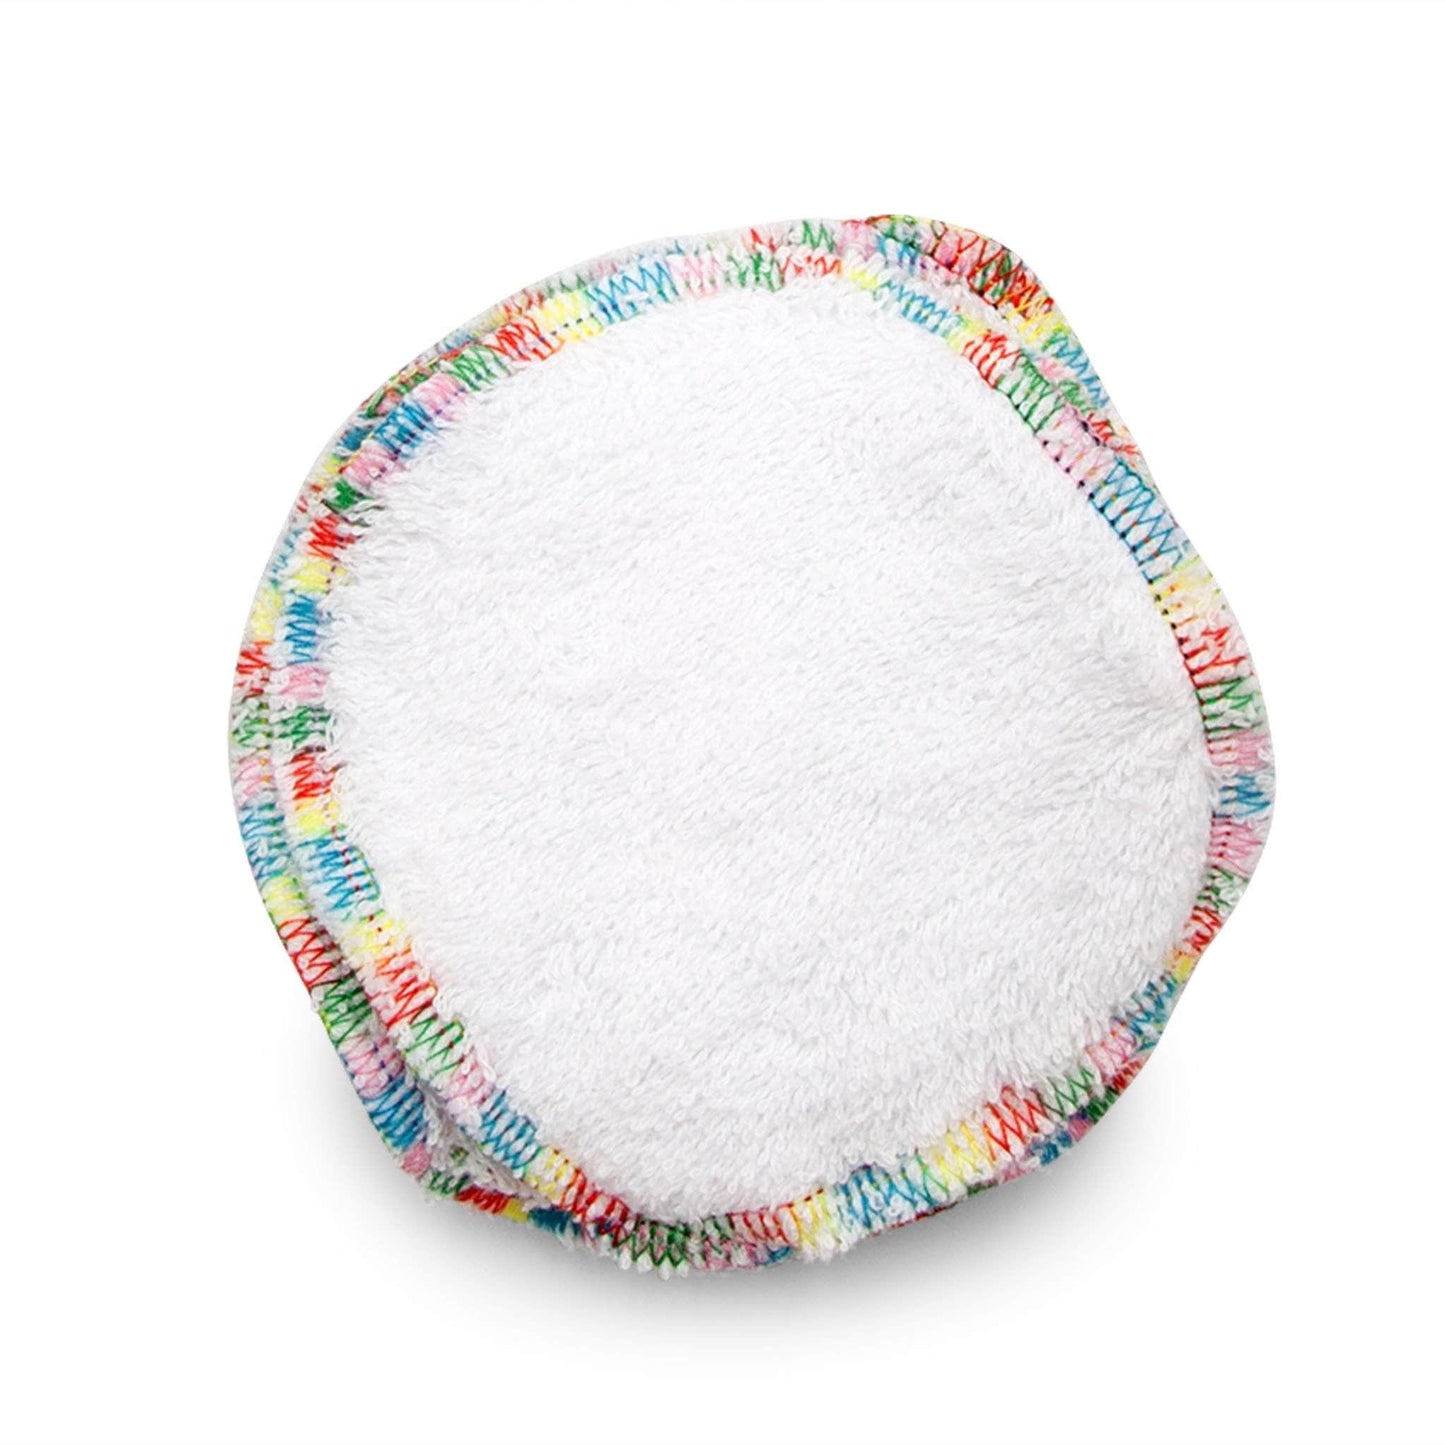 Mily Designs Maternity Mily Designs Heavy Absorbency Breast Pads - 3 Pairs - Surprise Prints